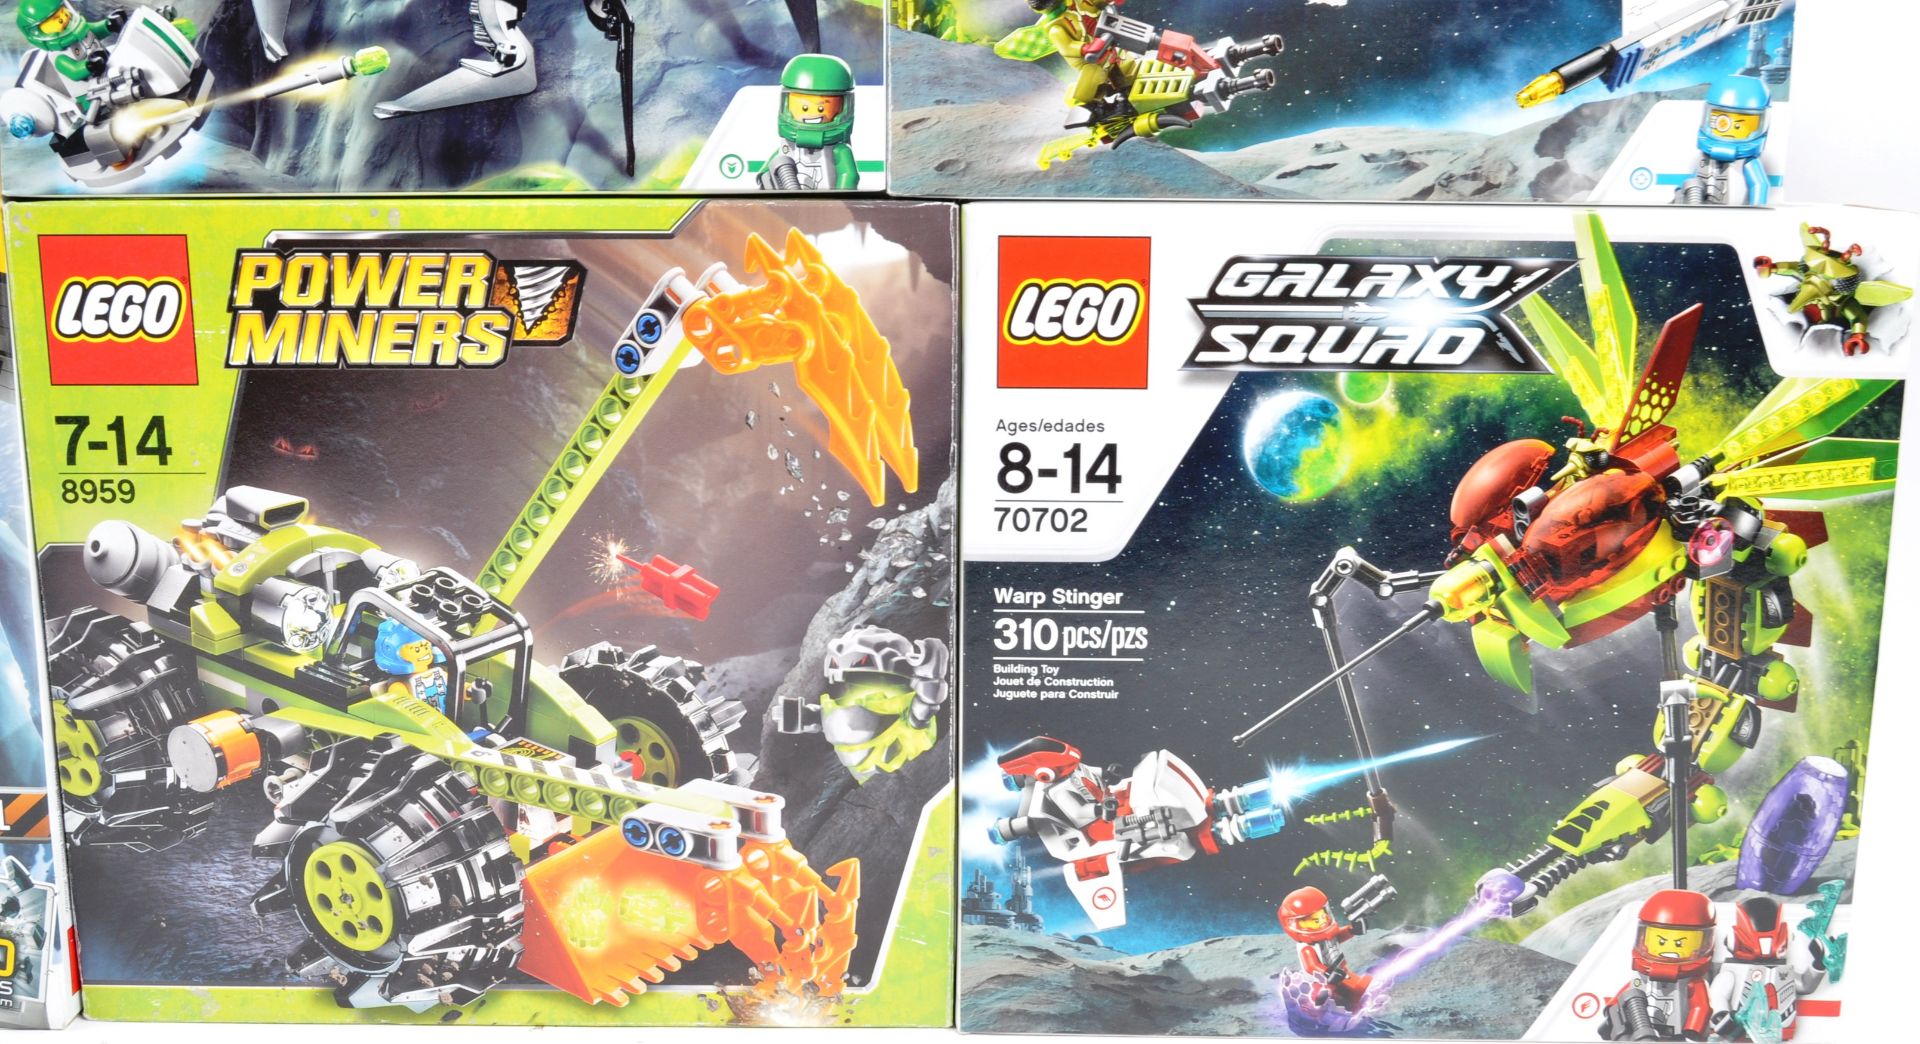 LEGO SETS - GALAXY SQUAD - HERO FACTORY - POWER MINERS - Image 3 of 6